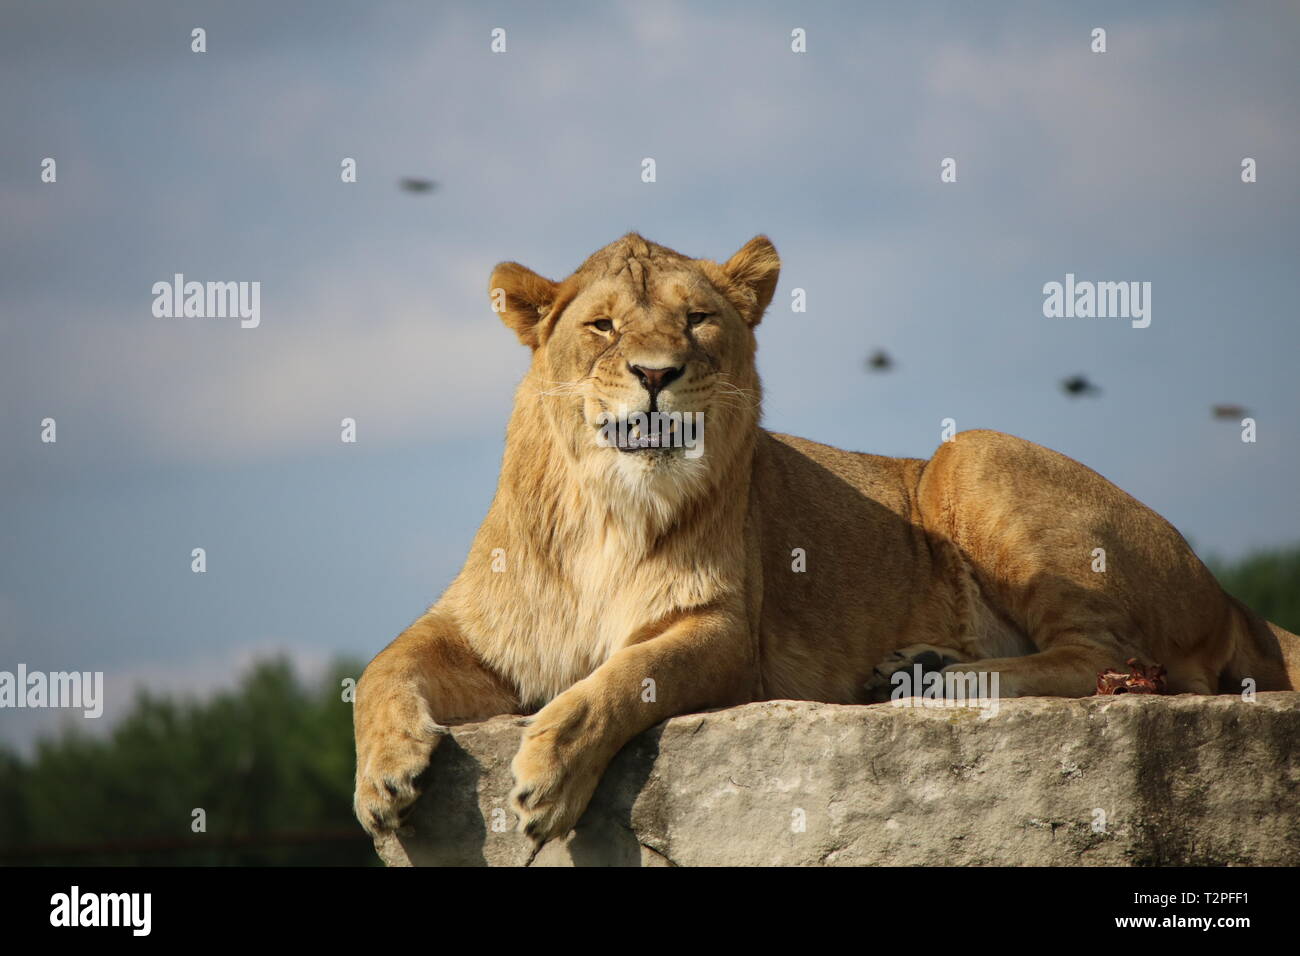 Female Lion Smiling and Growling Stock Photo